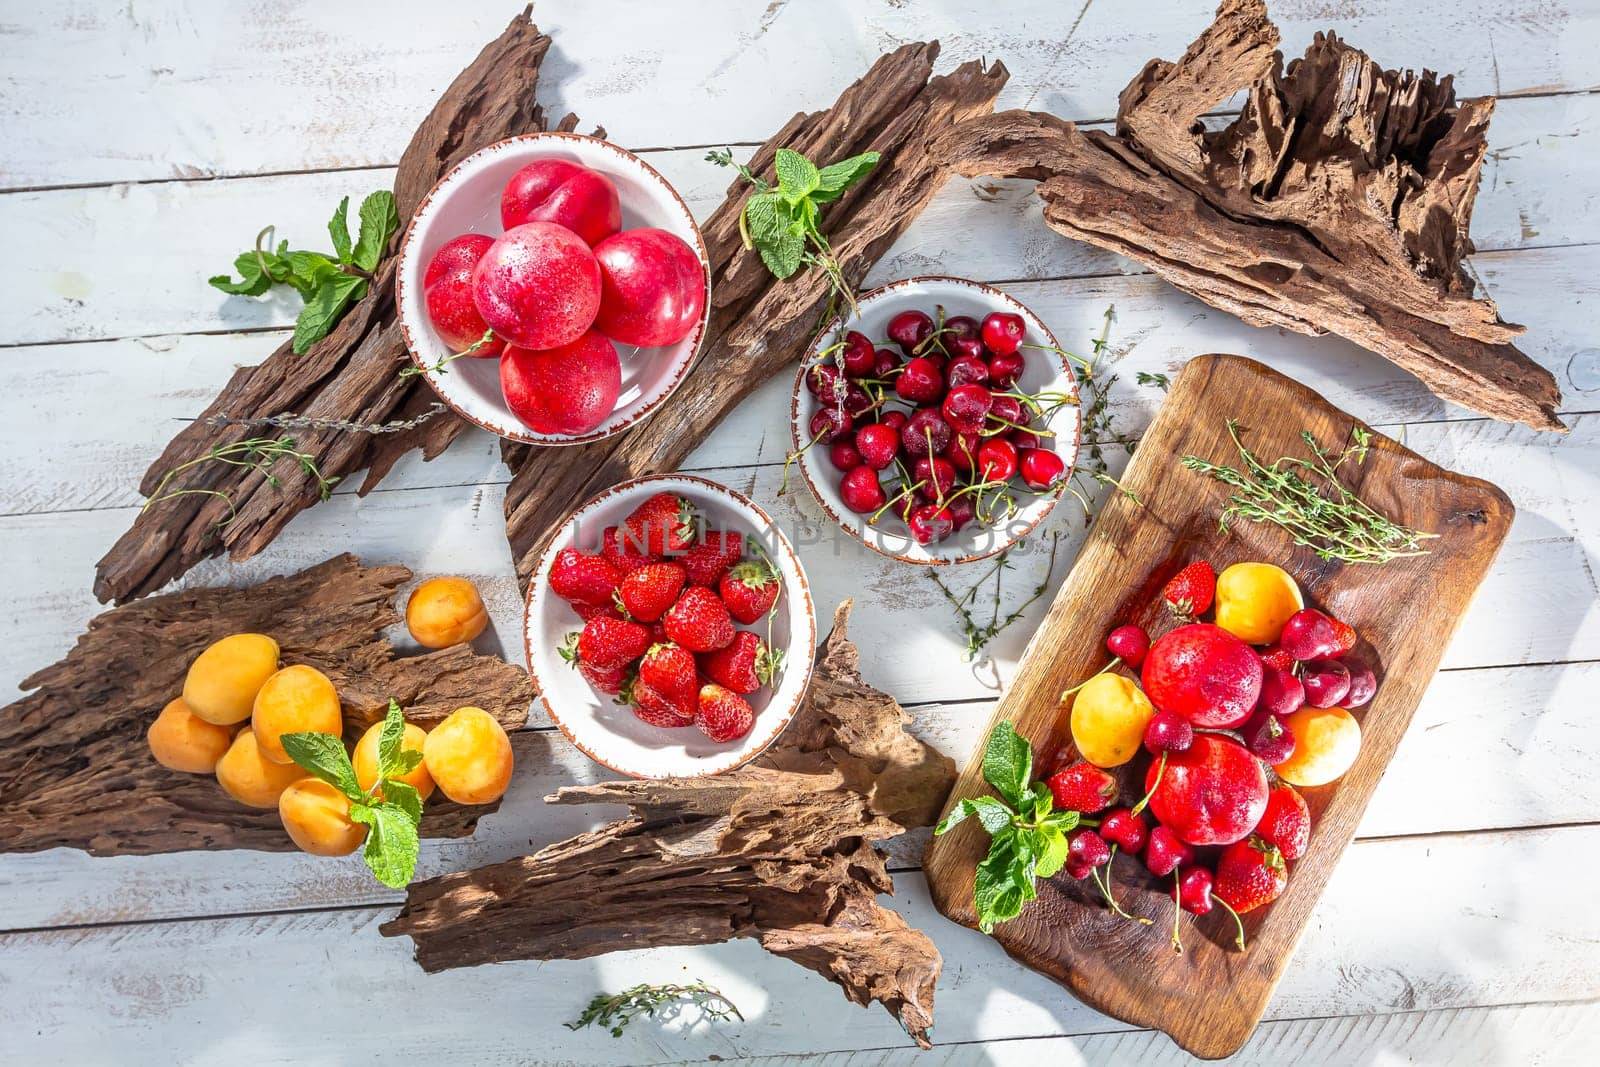 Fresh berries and fruits on a old-fashioned wooden plate on rotten stump. Countryside. by Milanchikov